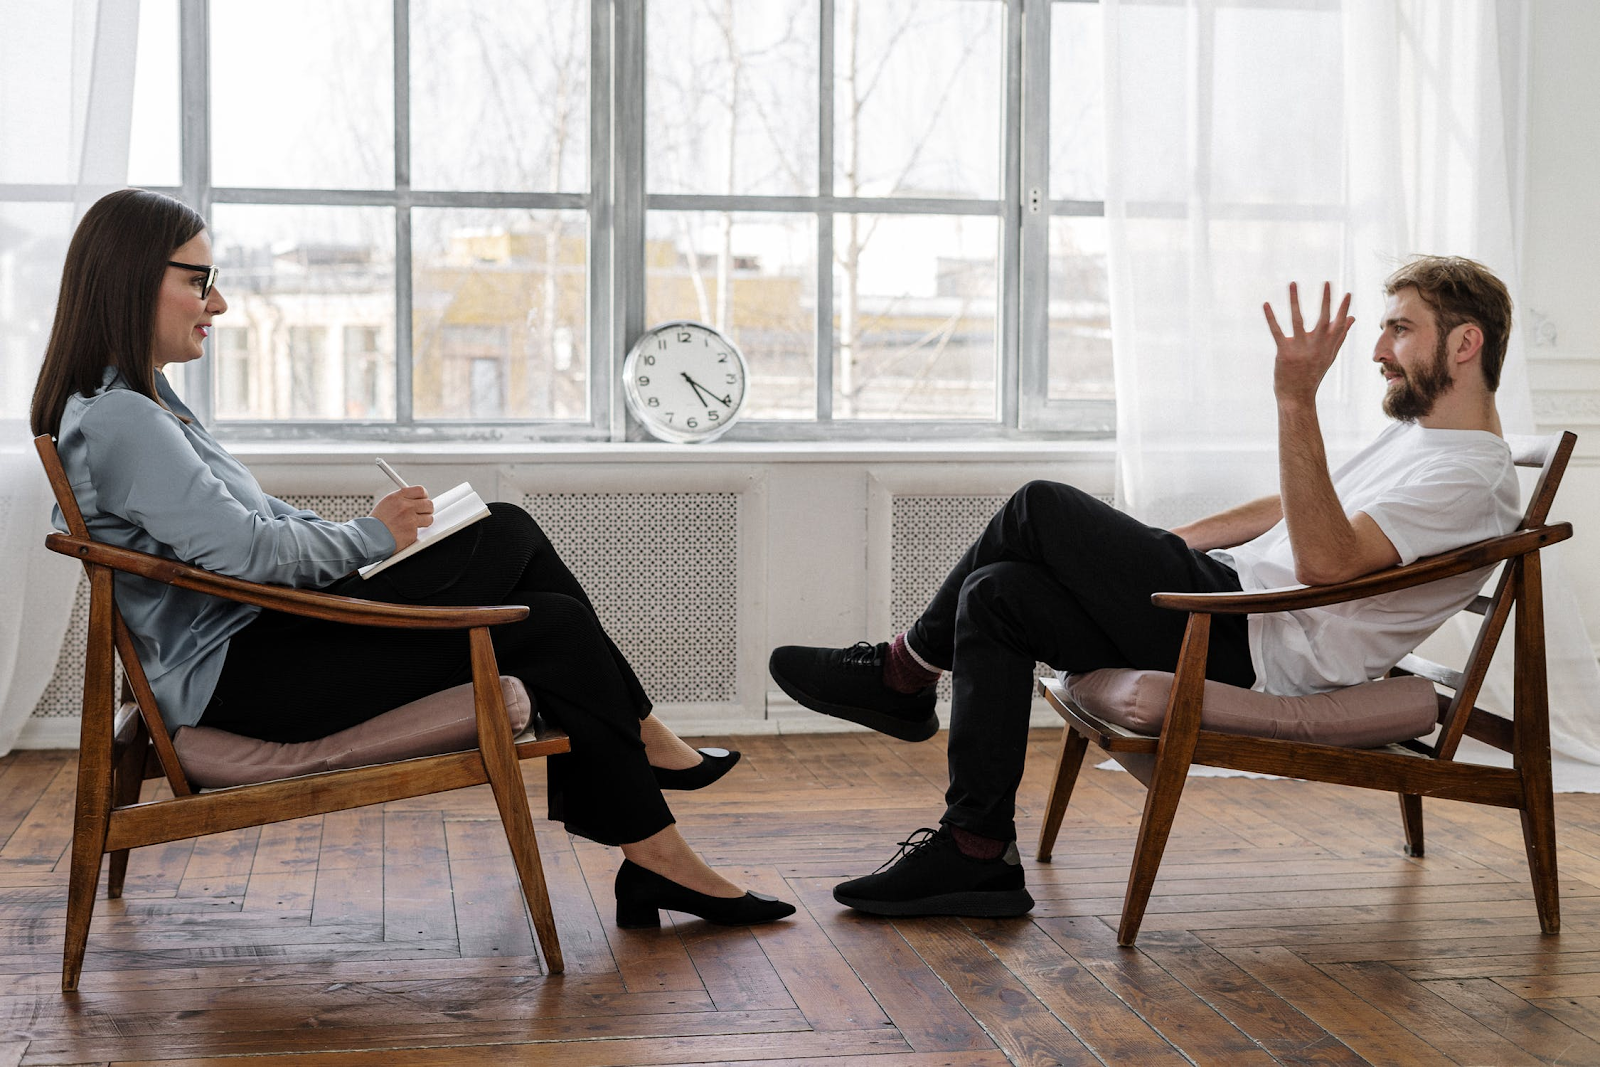 An image of two people in chairs sitting across from each other, with a clock balanced on the window between them. The woman is taking notes and listening as the man talks and gestures.